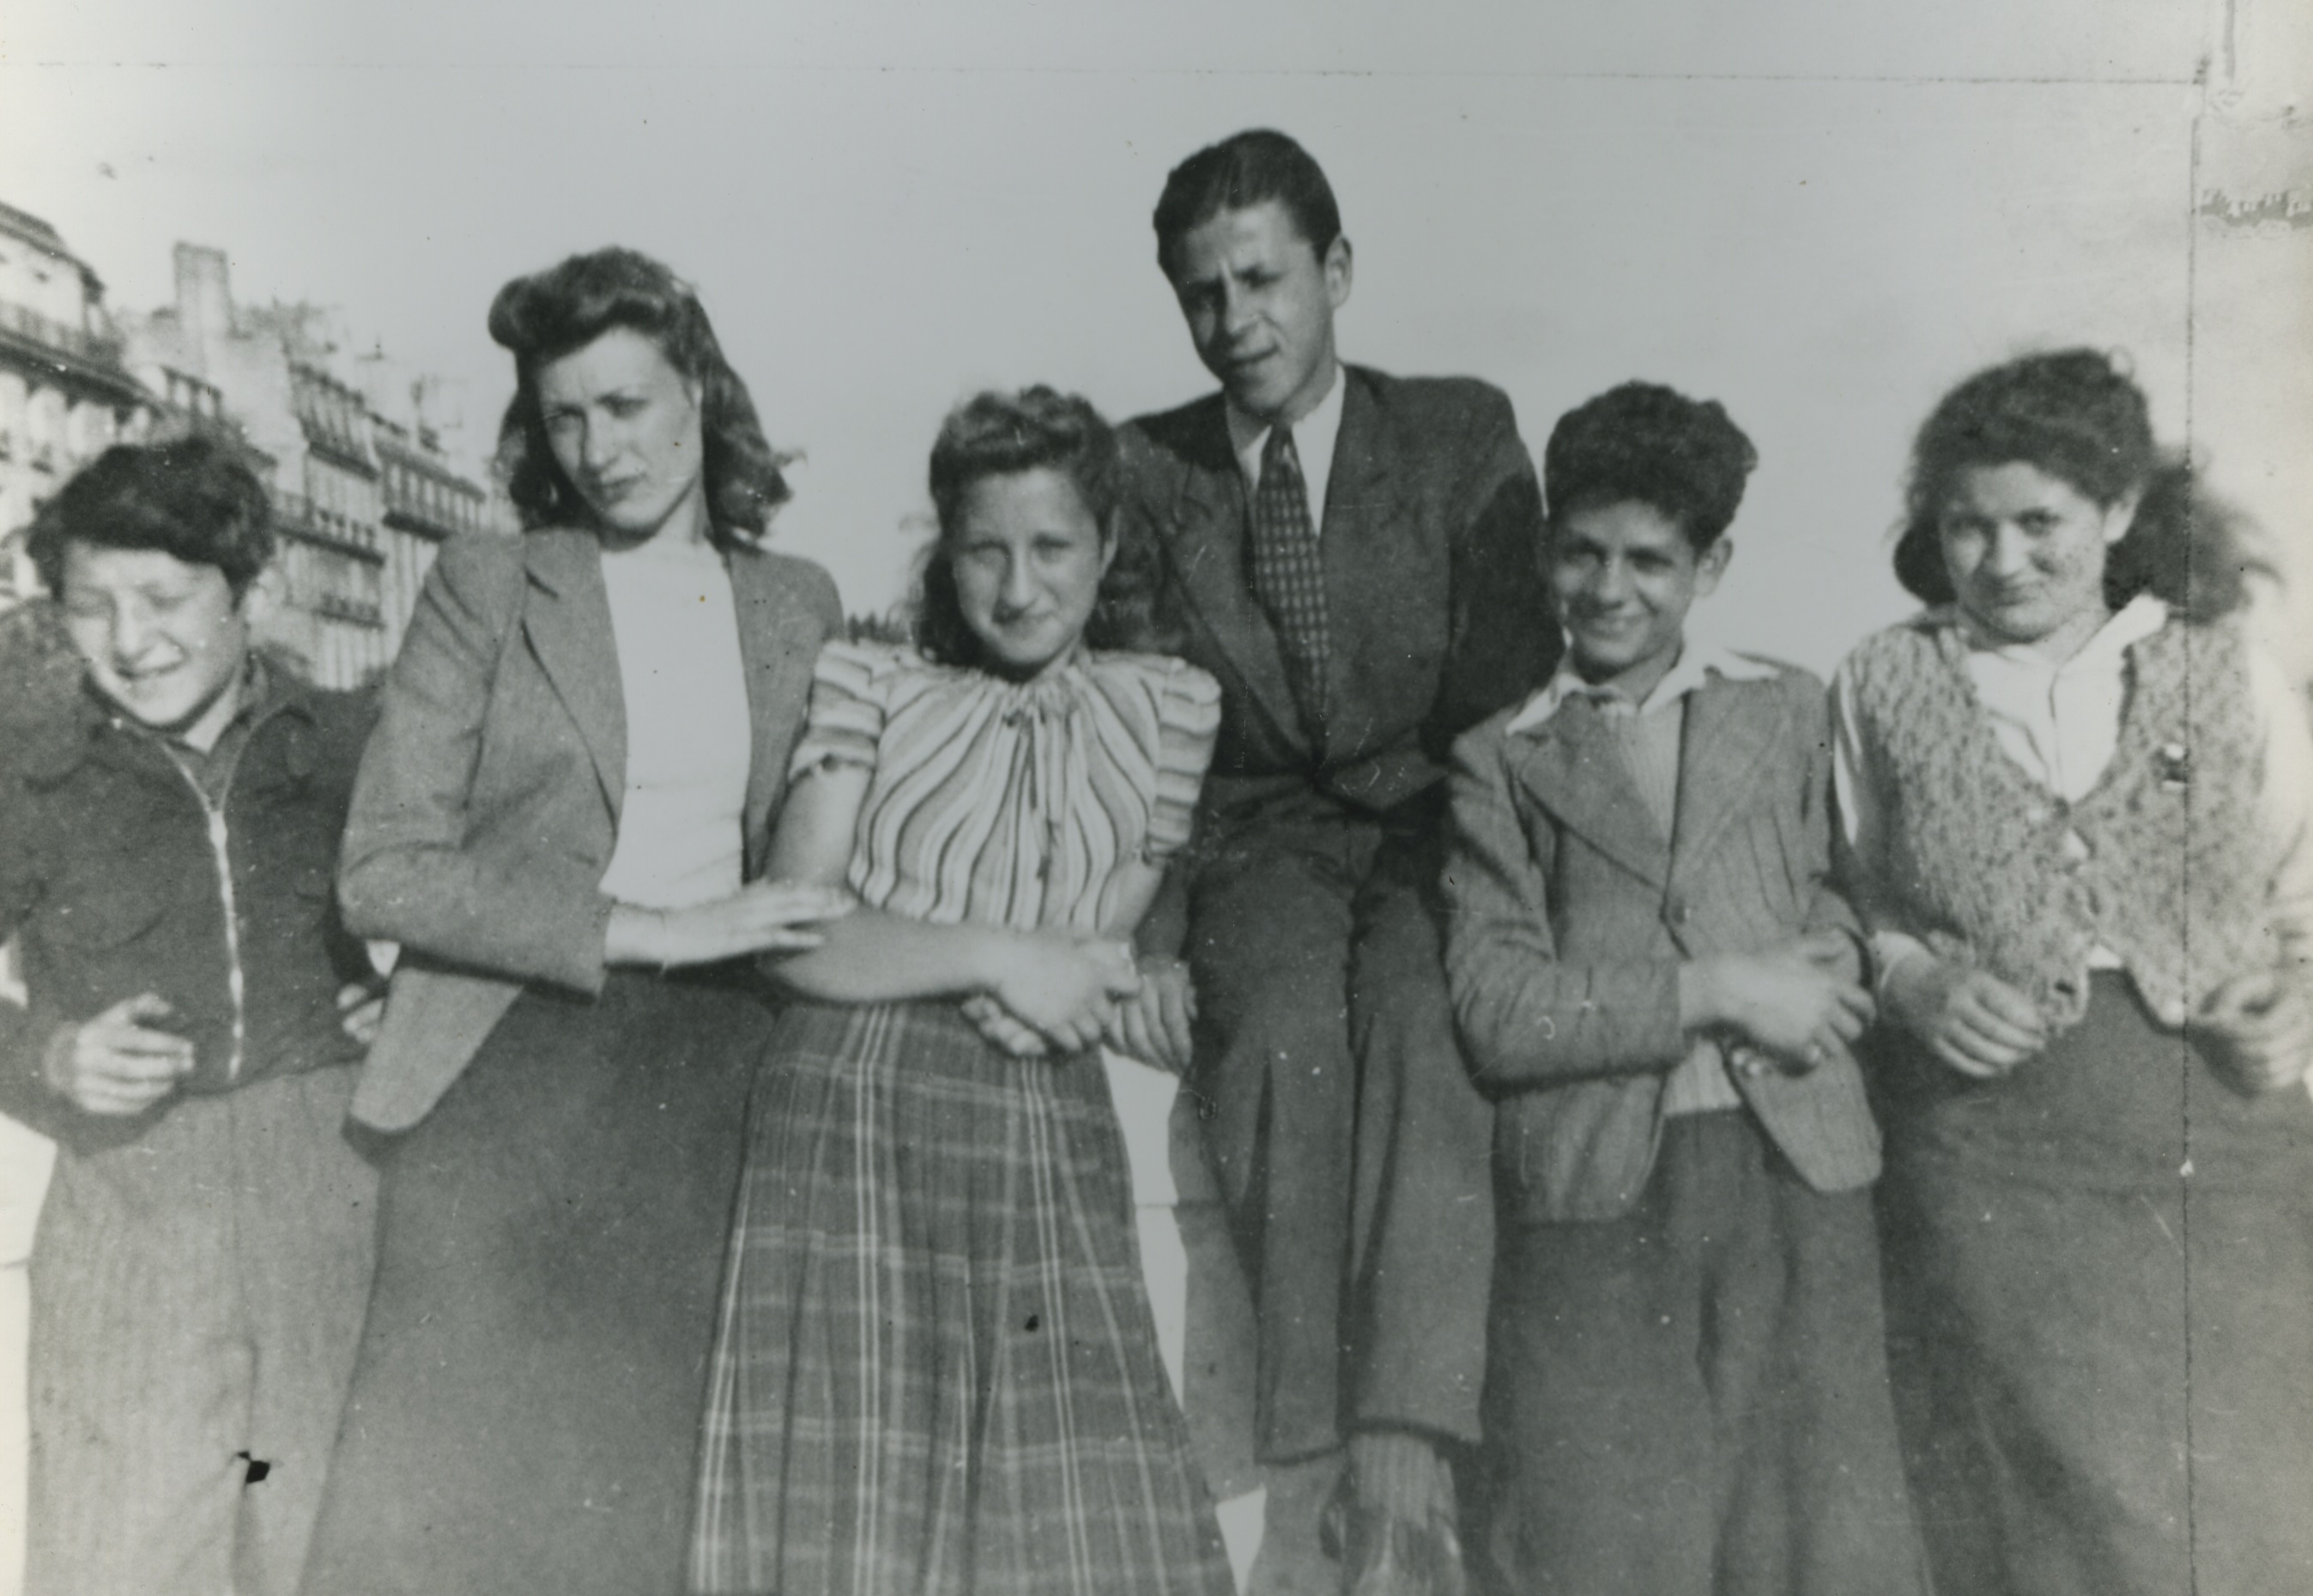 Robert Clary as a young man with his family. Photo courtesy of The Robert Clary Archives.